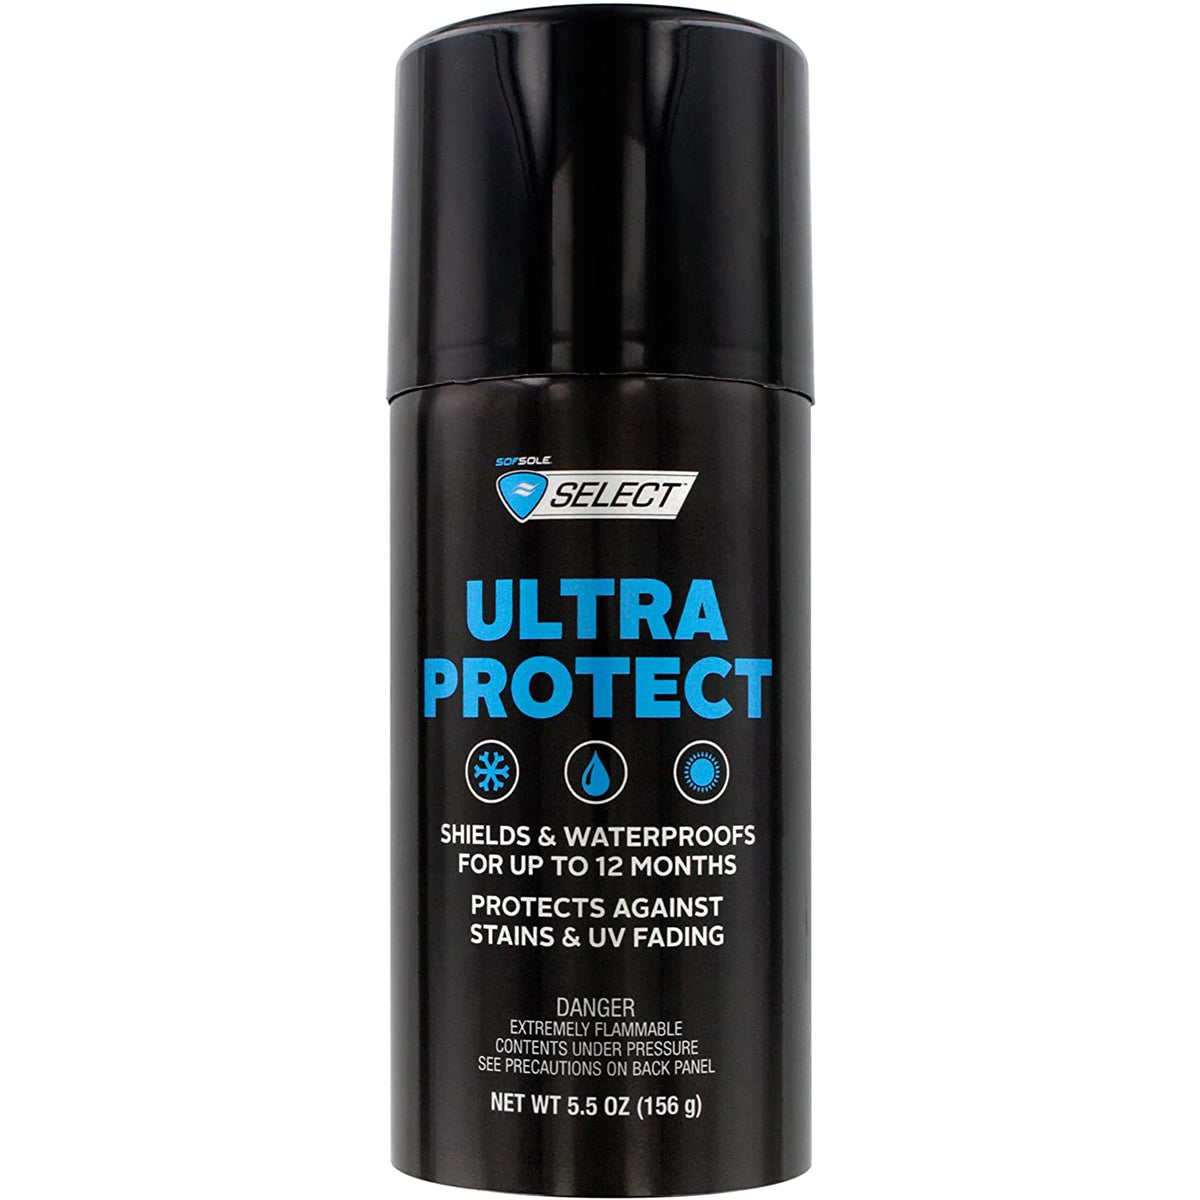 Sof Sole Ultra Protect Waterproofing Treatment Spray SofSole